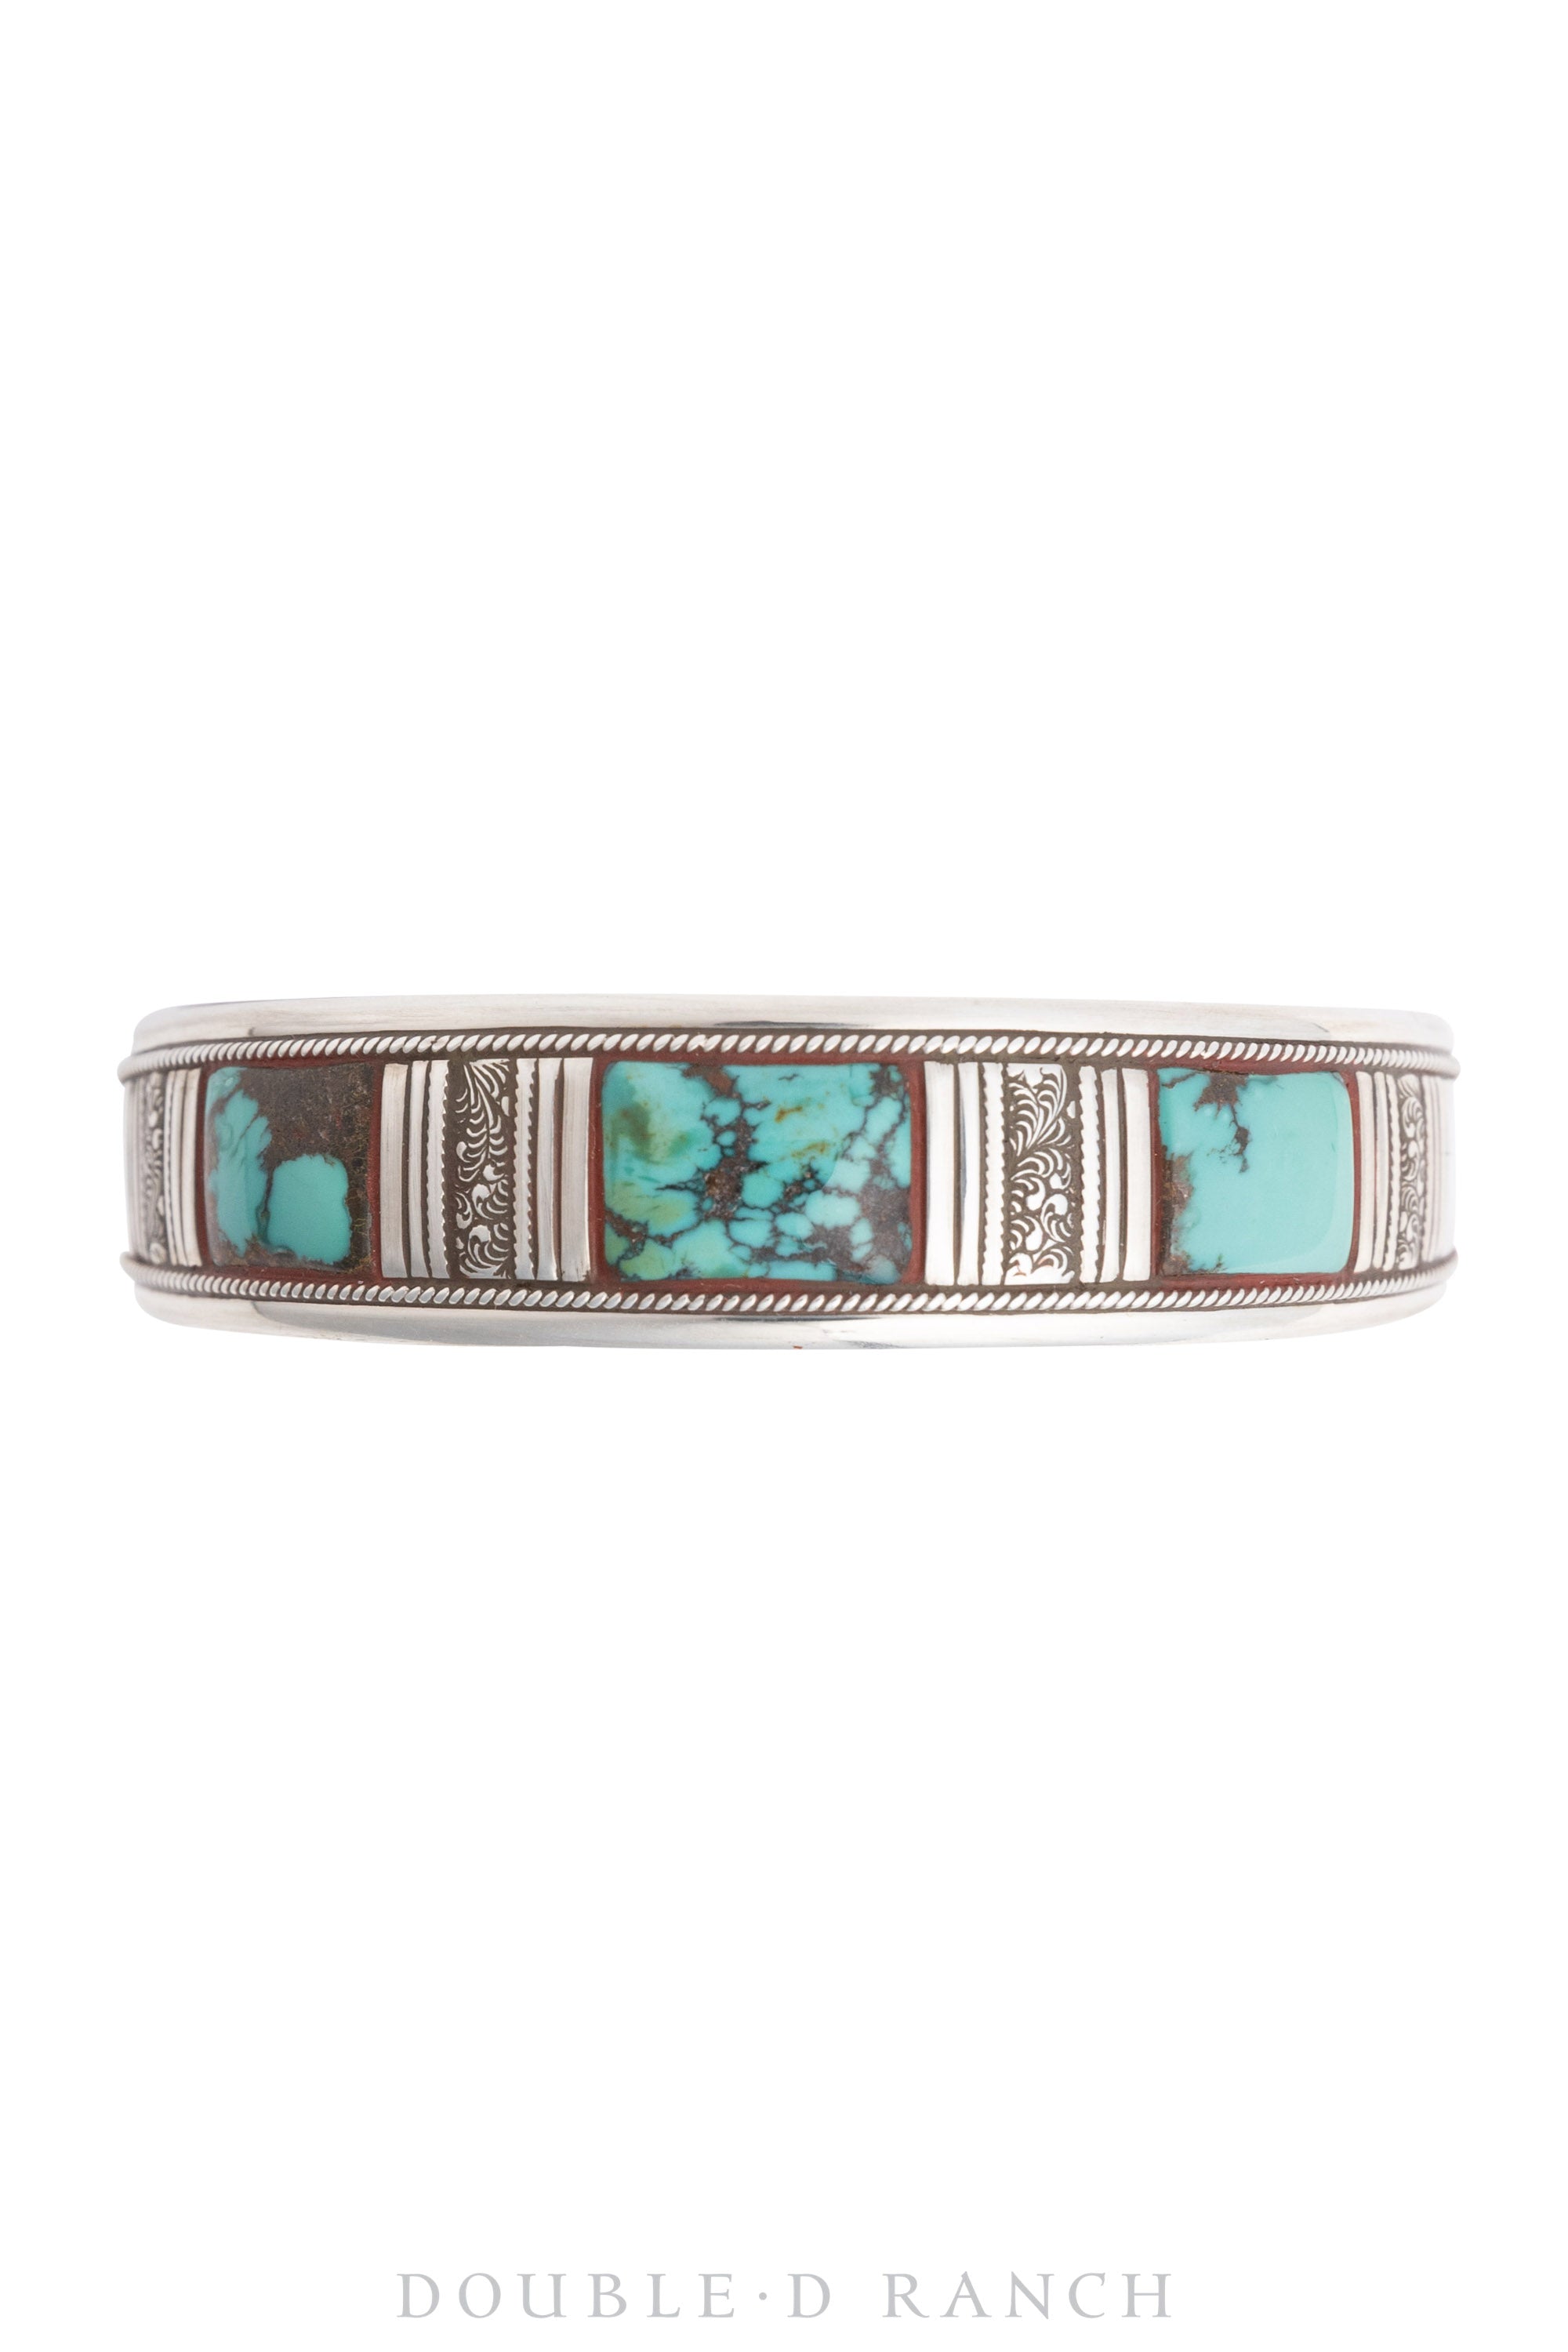 Cuff, Inlay, Turquoise, Sterling Silver, Leather Lined, Artisan, Contemporary, 3407